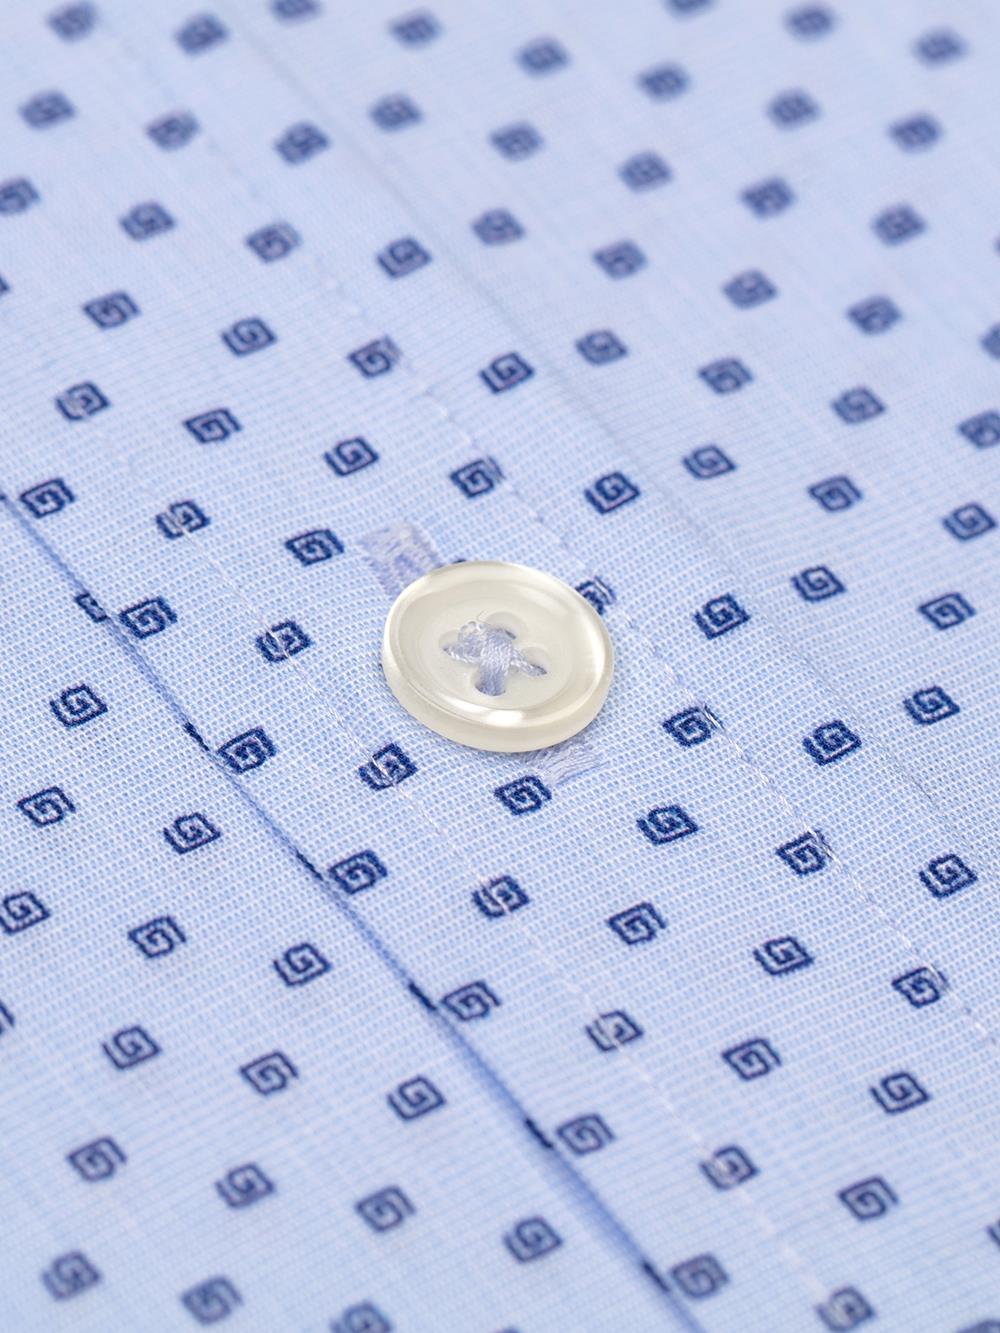 Irwin fitted shirt - Buttoned collar